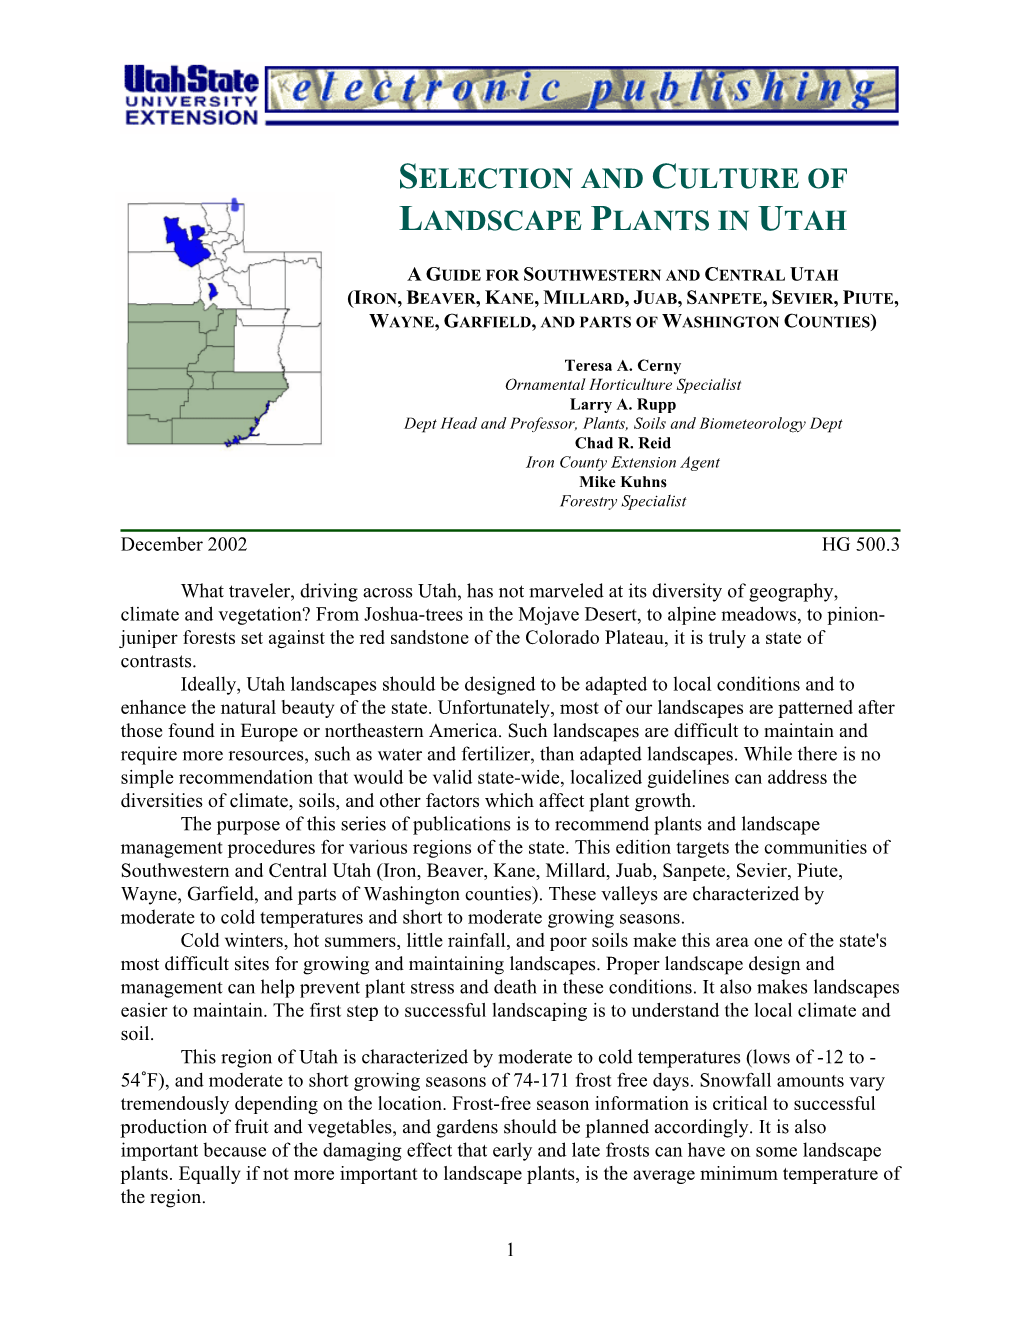 Selectionand Culture of Landscape Plants in Utah, a Guide For